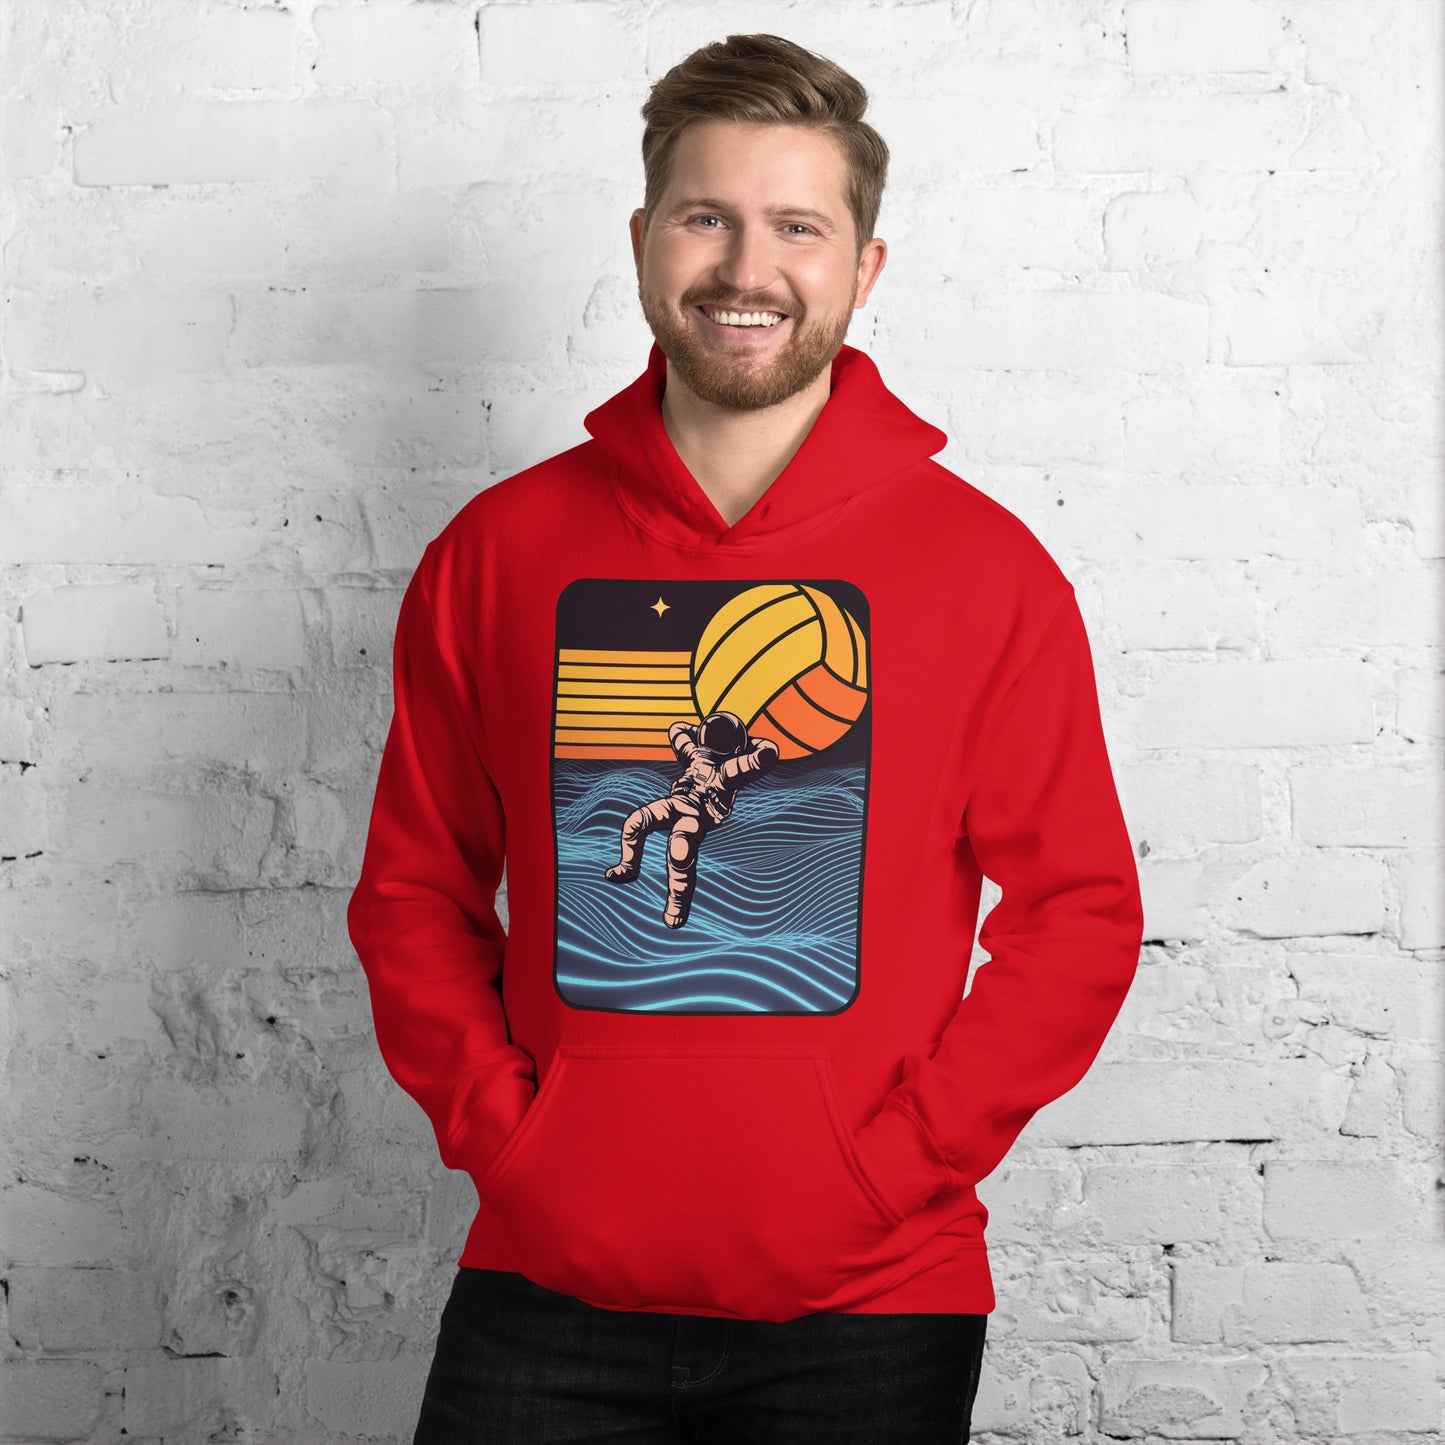 My Water Polo Game is out of this World - Unisex Heavy Blend Hoodie - Gildan 18500